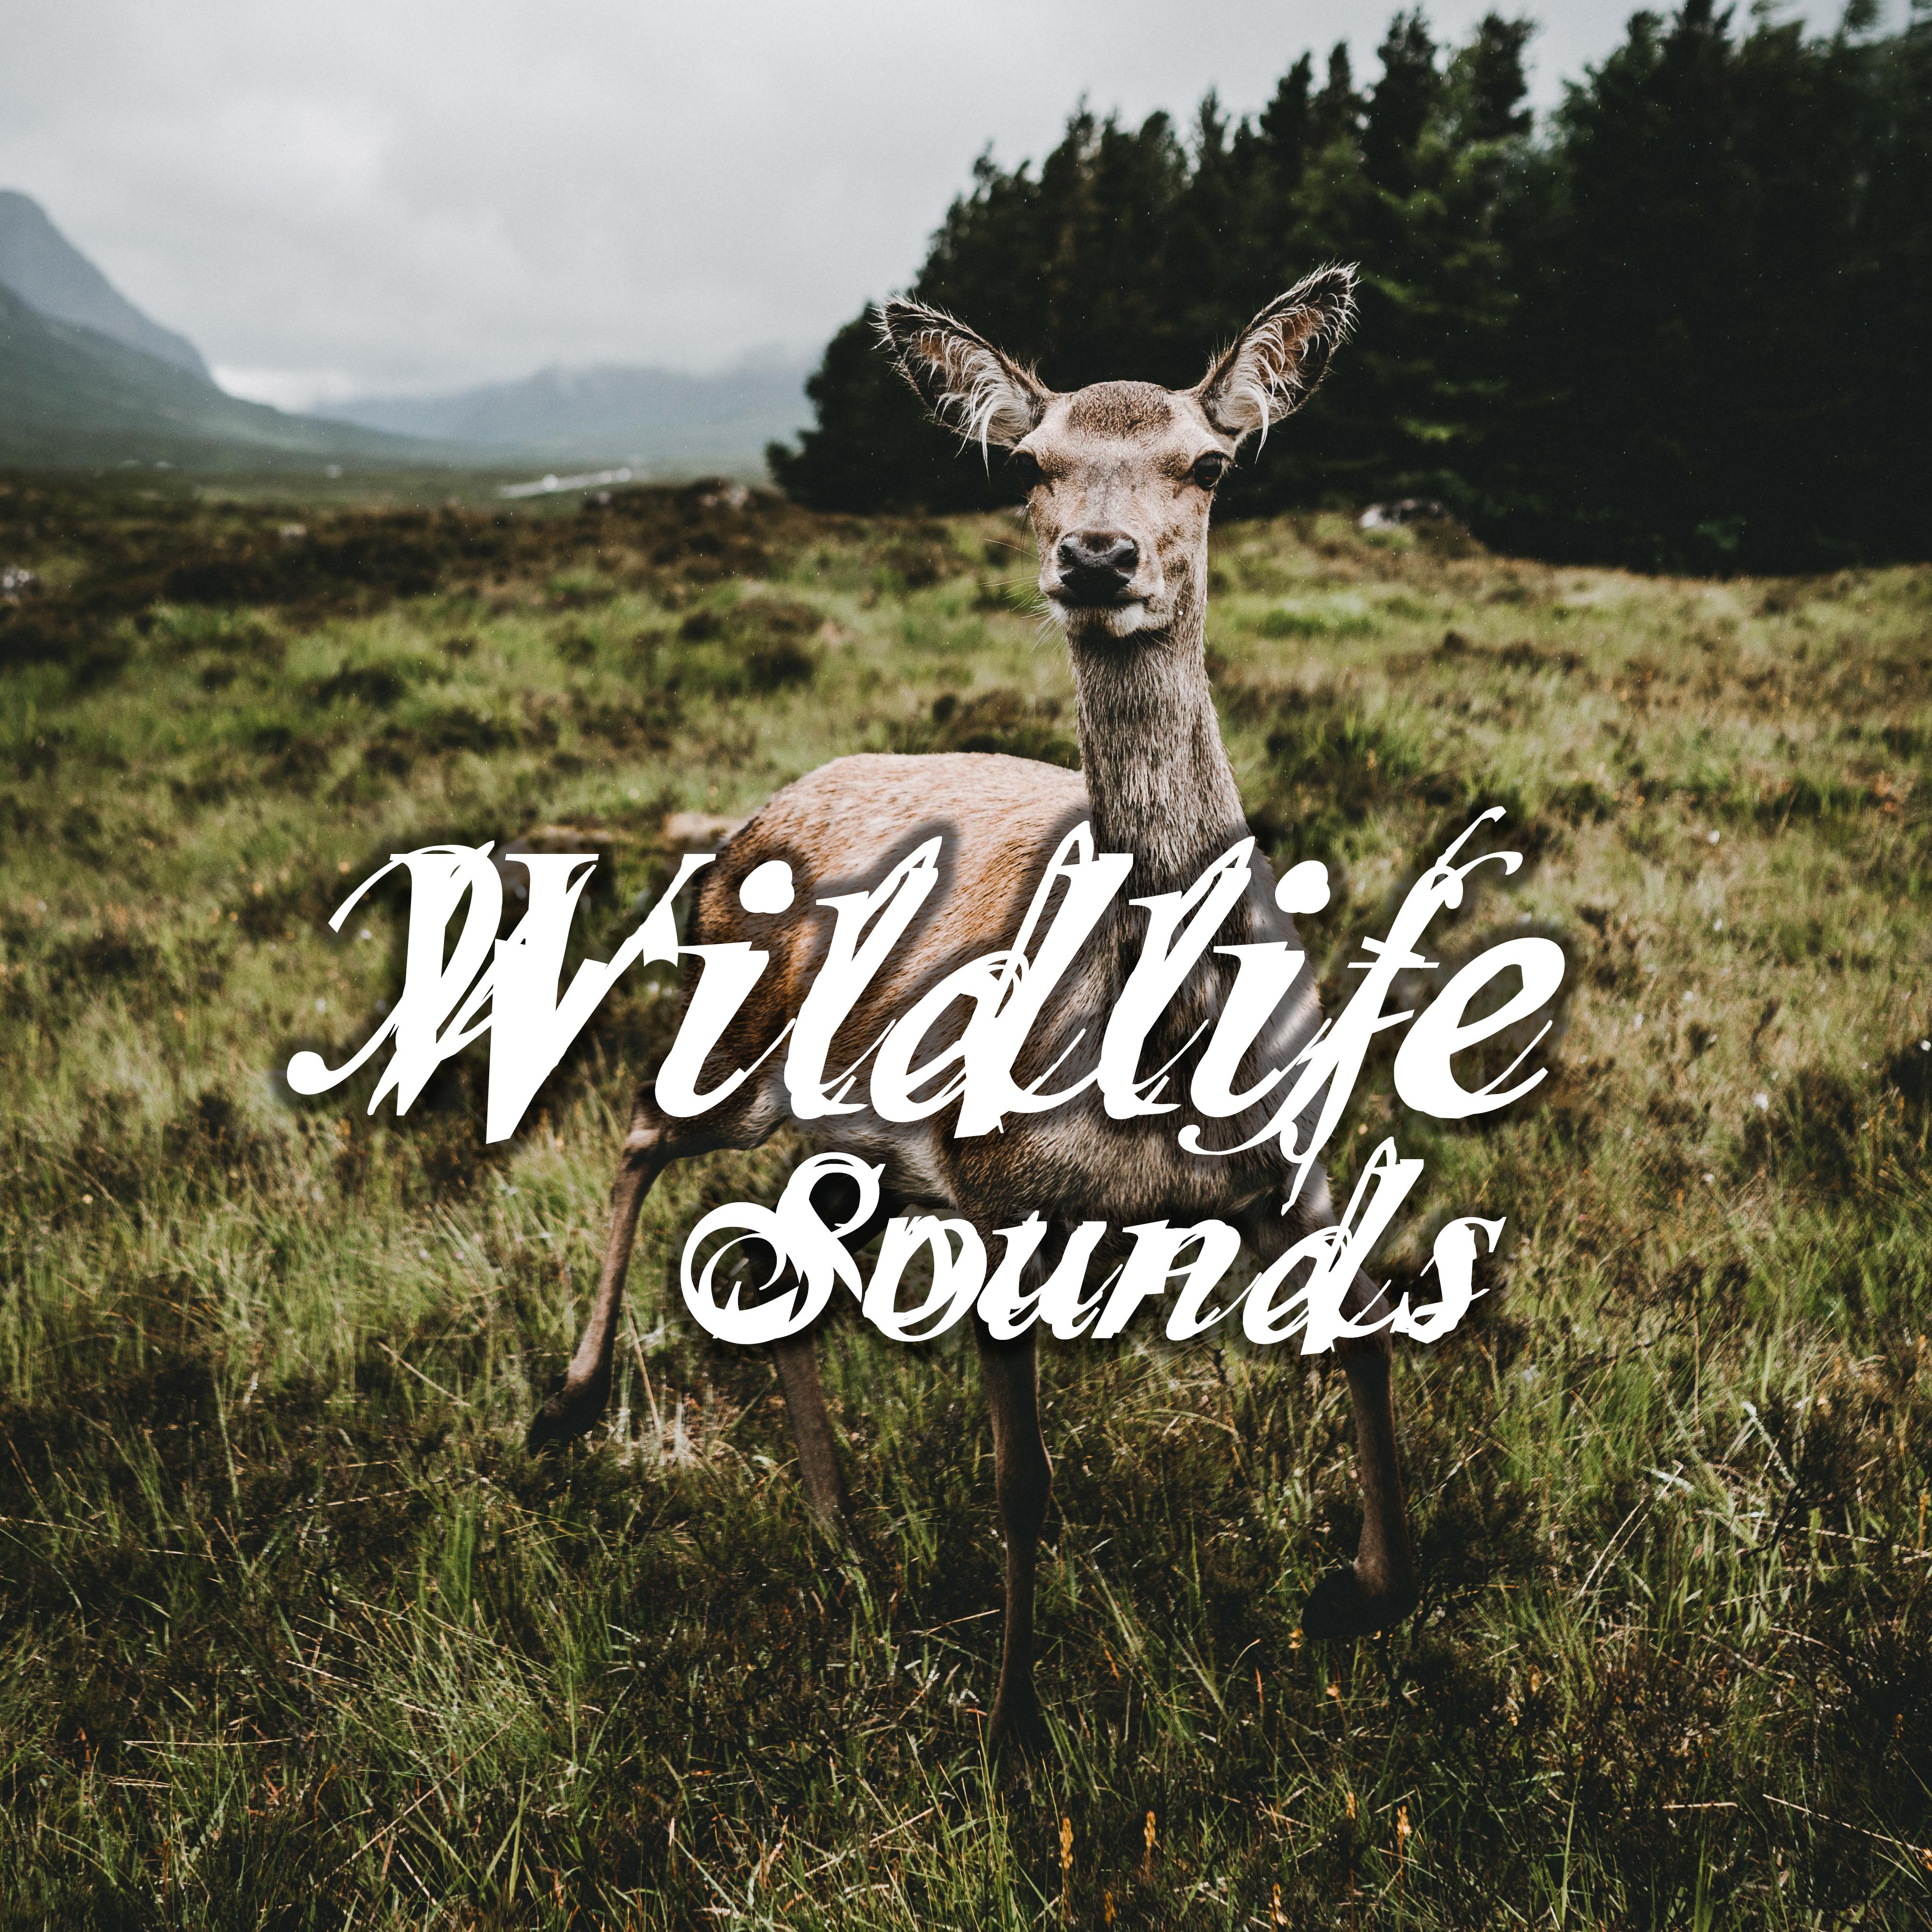 Wildlife Sounds – Nature Sounds, Music for Relax, Relief Stress, Reduce Anxiety, Calm of Mind, Bliss